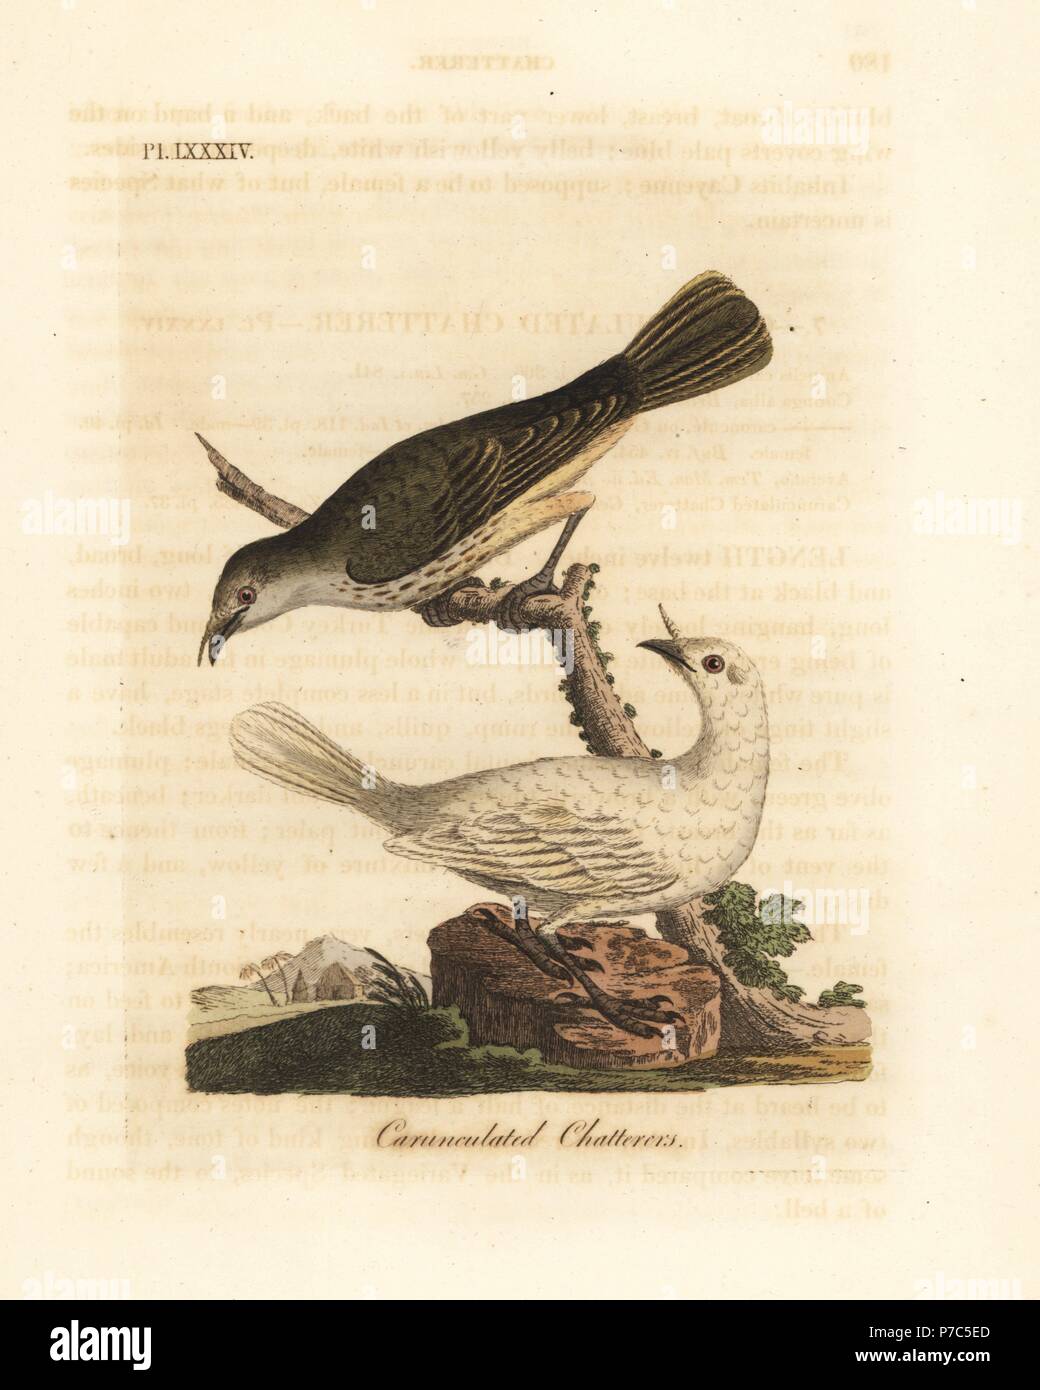 White bellbird, Procnias albus, male and female (Carunculated chatterer, Ampelis carunculata). Handcoloured copperplate drawn and engraved by John Latham from his own A General History of Birds, Winchester, 1822. Stock Photo